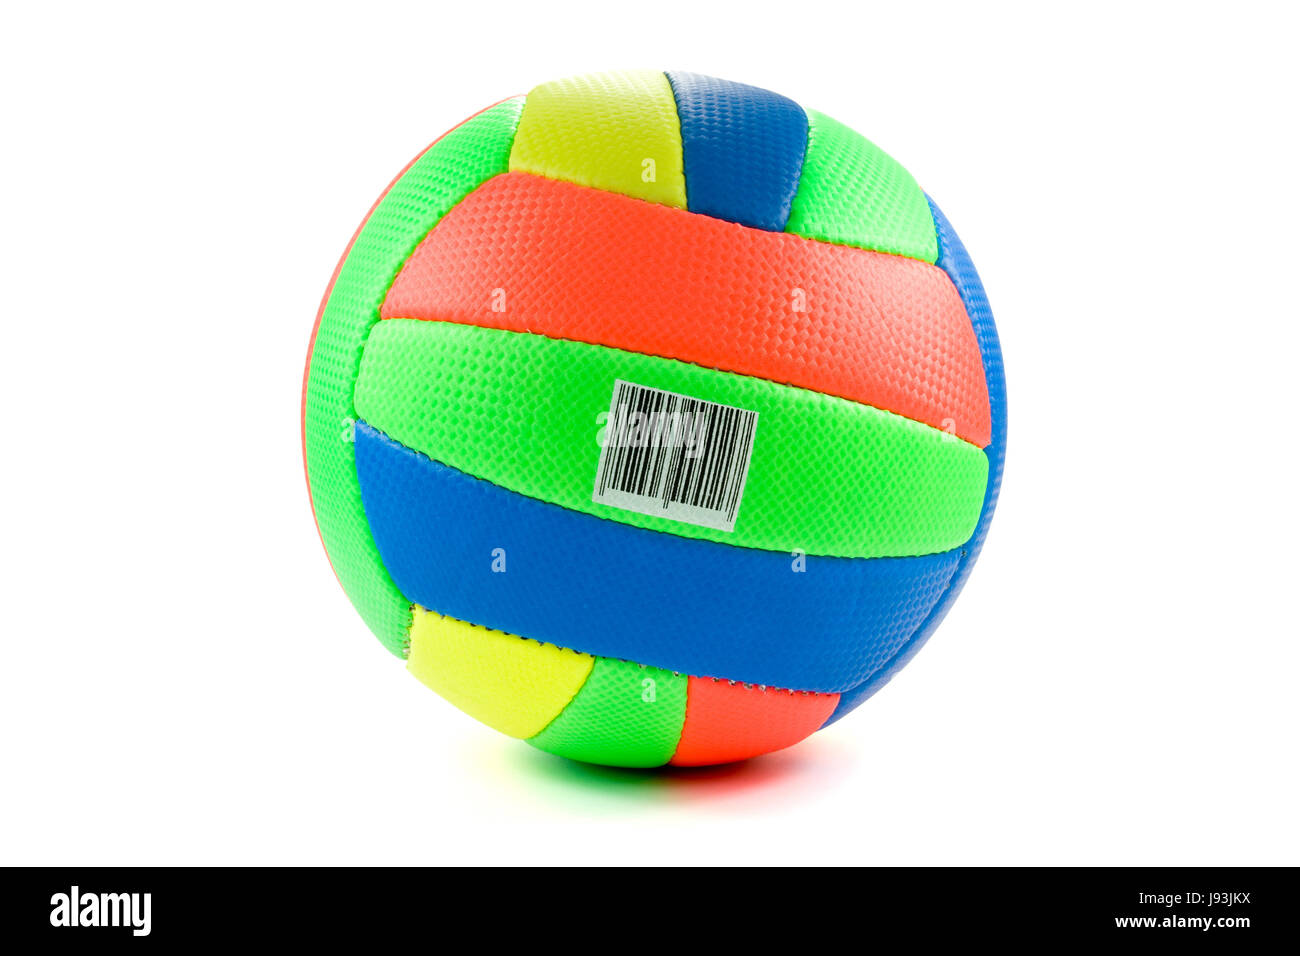 sport, sports, game, tournament, play, playing, plays, played, colour, ball, Stock Photo